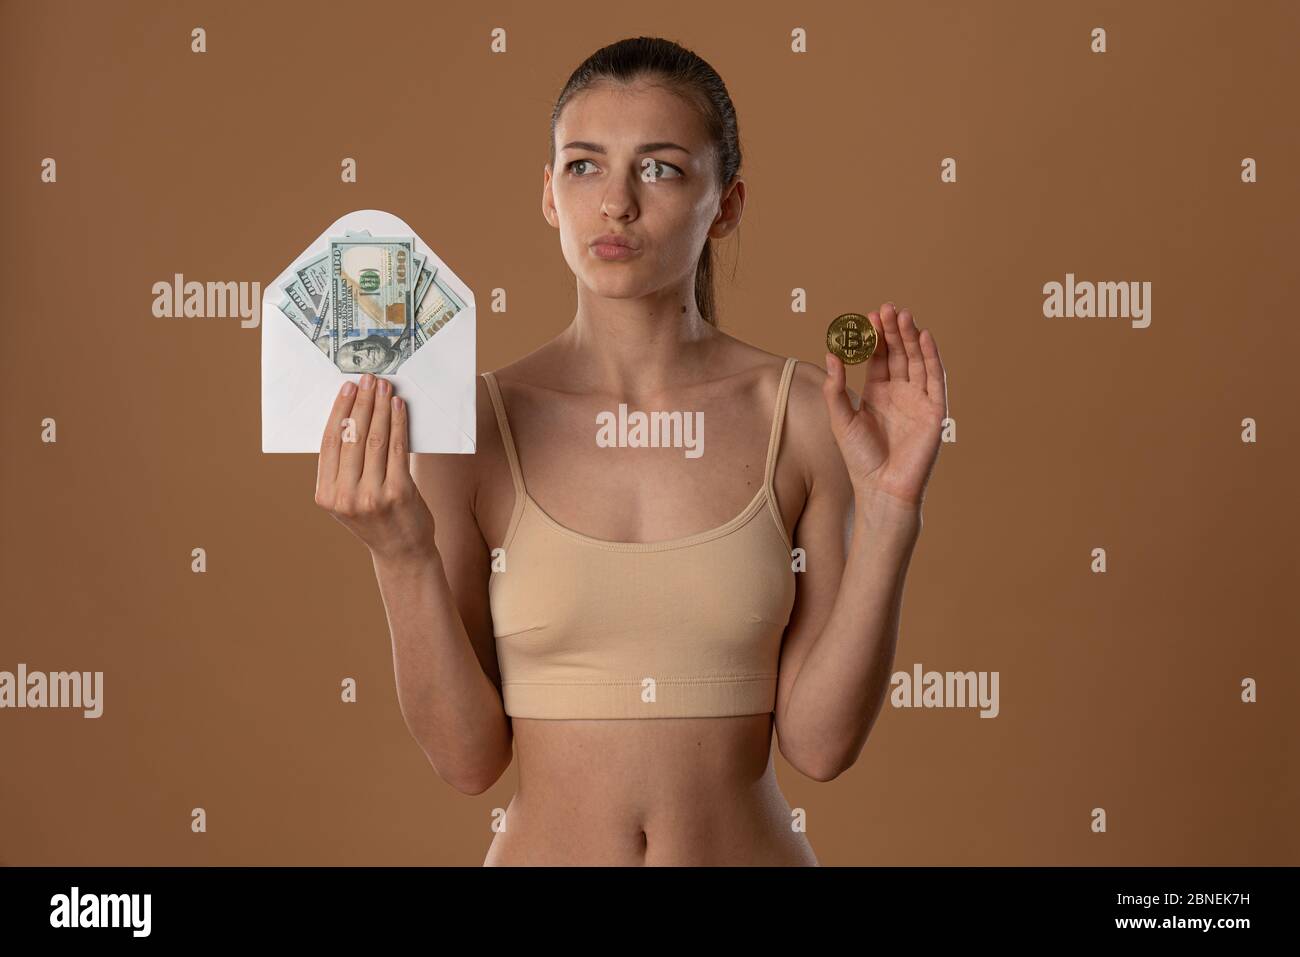 https://c8.alamy.com/comp/2BNEK7H/discomposed-pretty-brunette-girl-with-natural-makeup-dressed-in-beige-bra-holds-white-envelope-in-one-hand-and-bitcoin-golden-coin-in-other-2BNEK7H.jpg